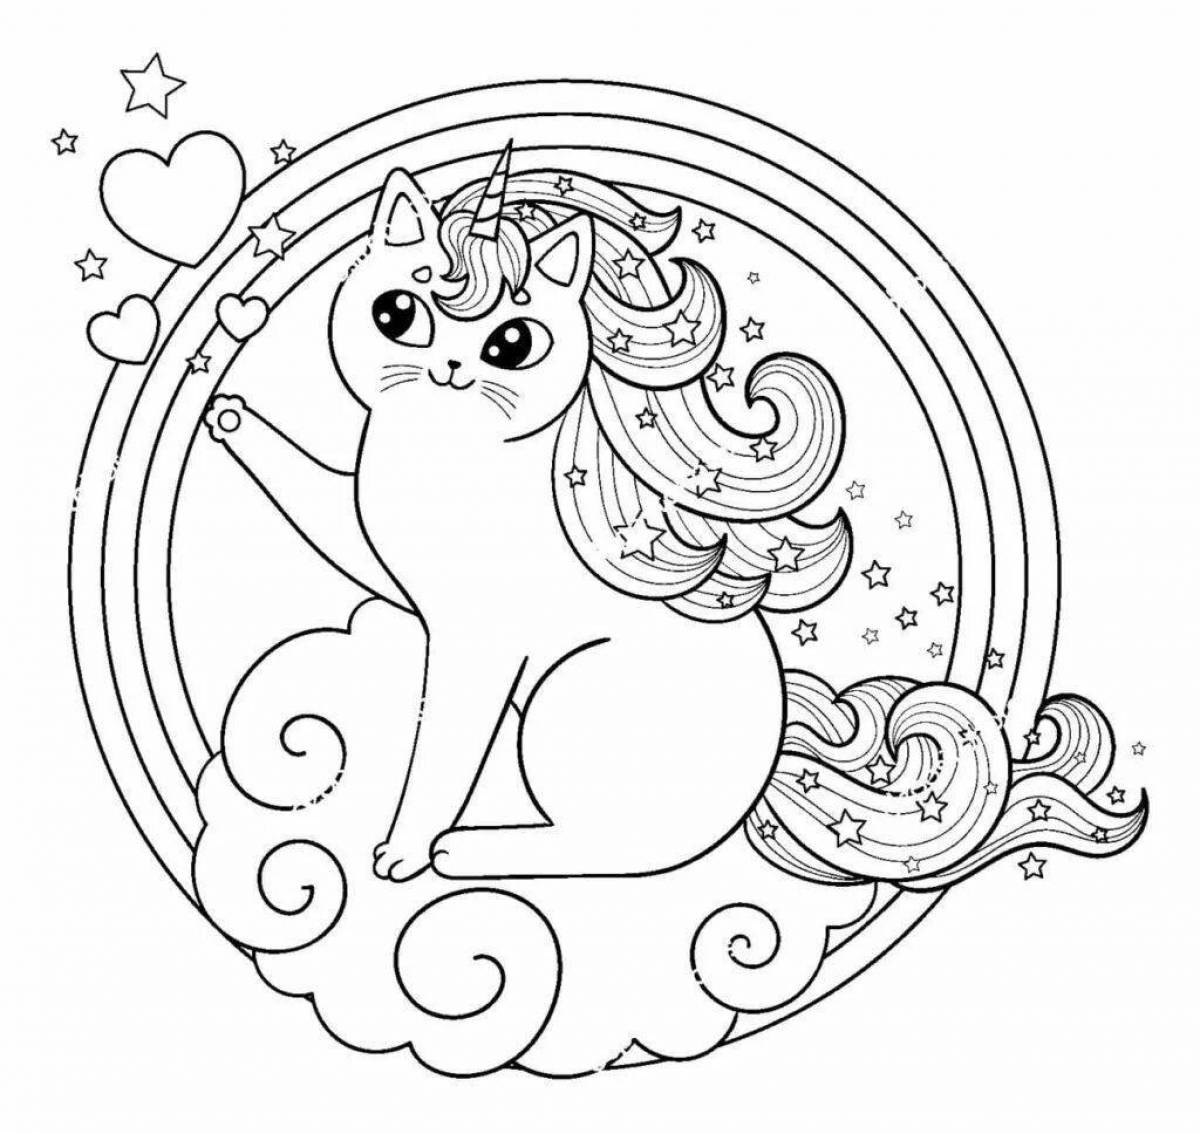 Awesome rainbow cat unicorn coloring page